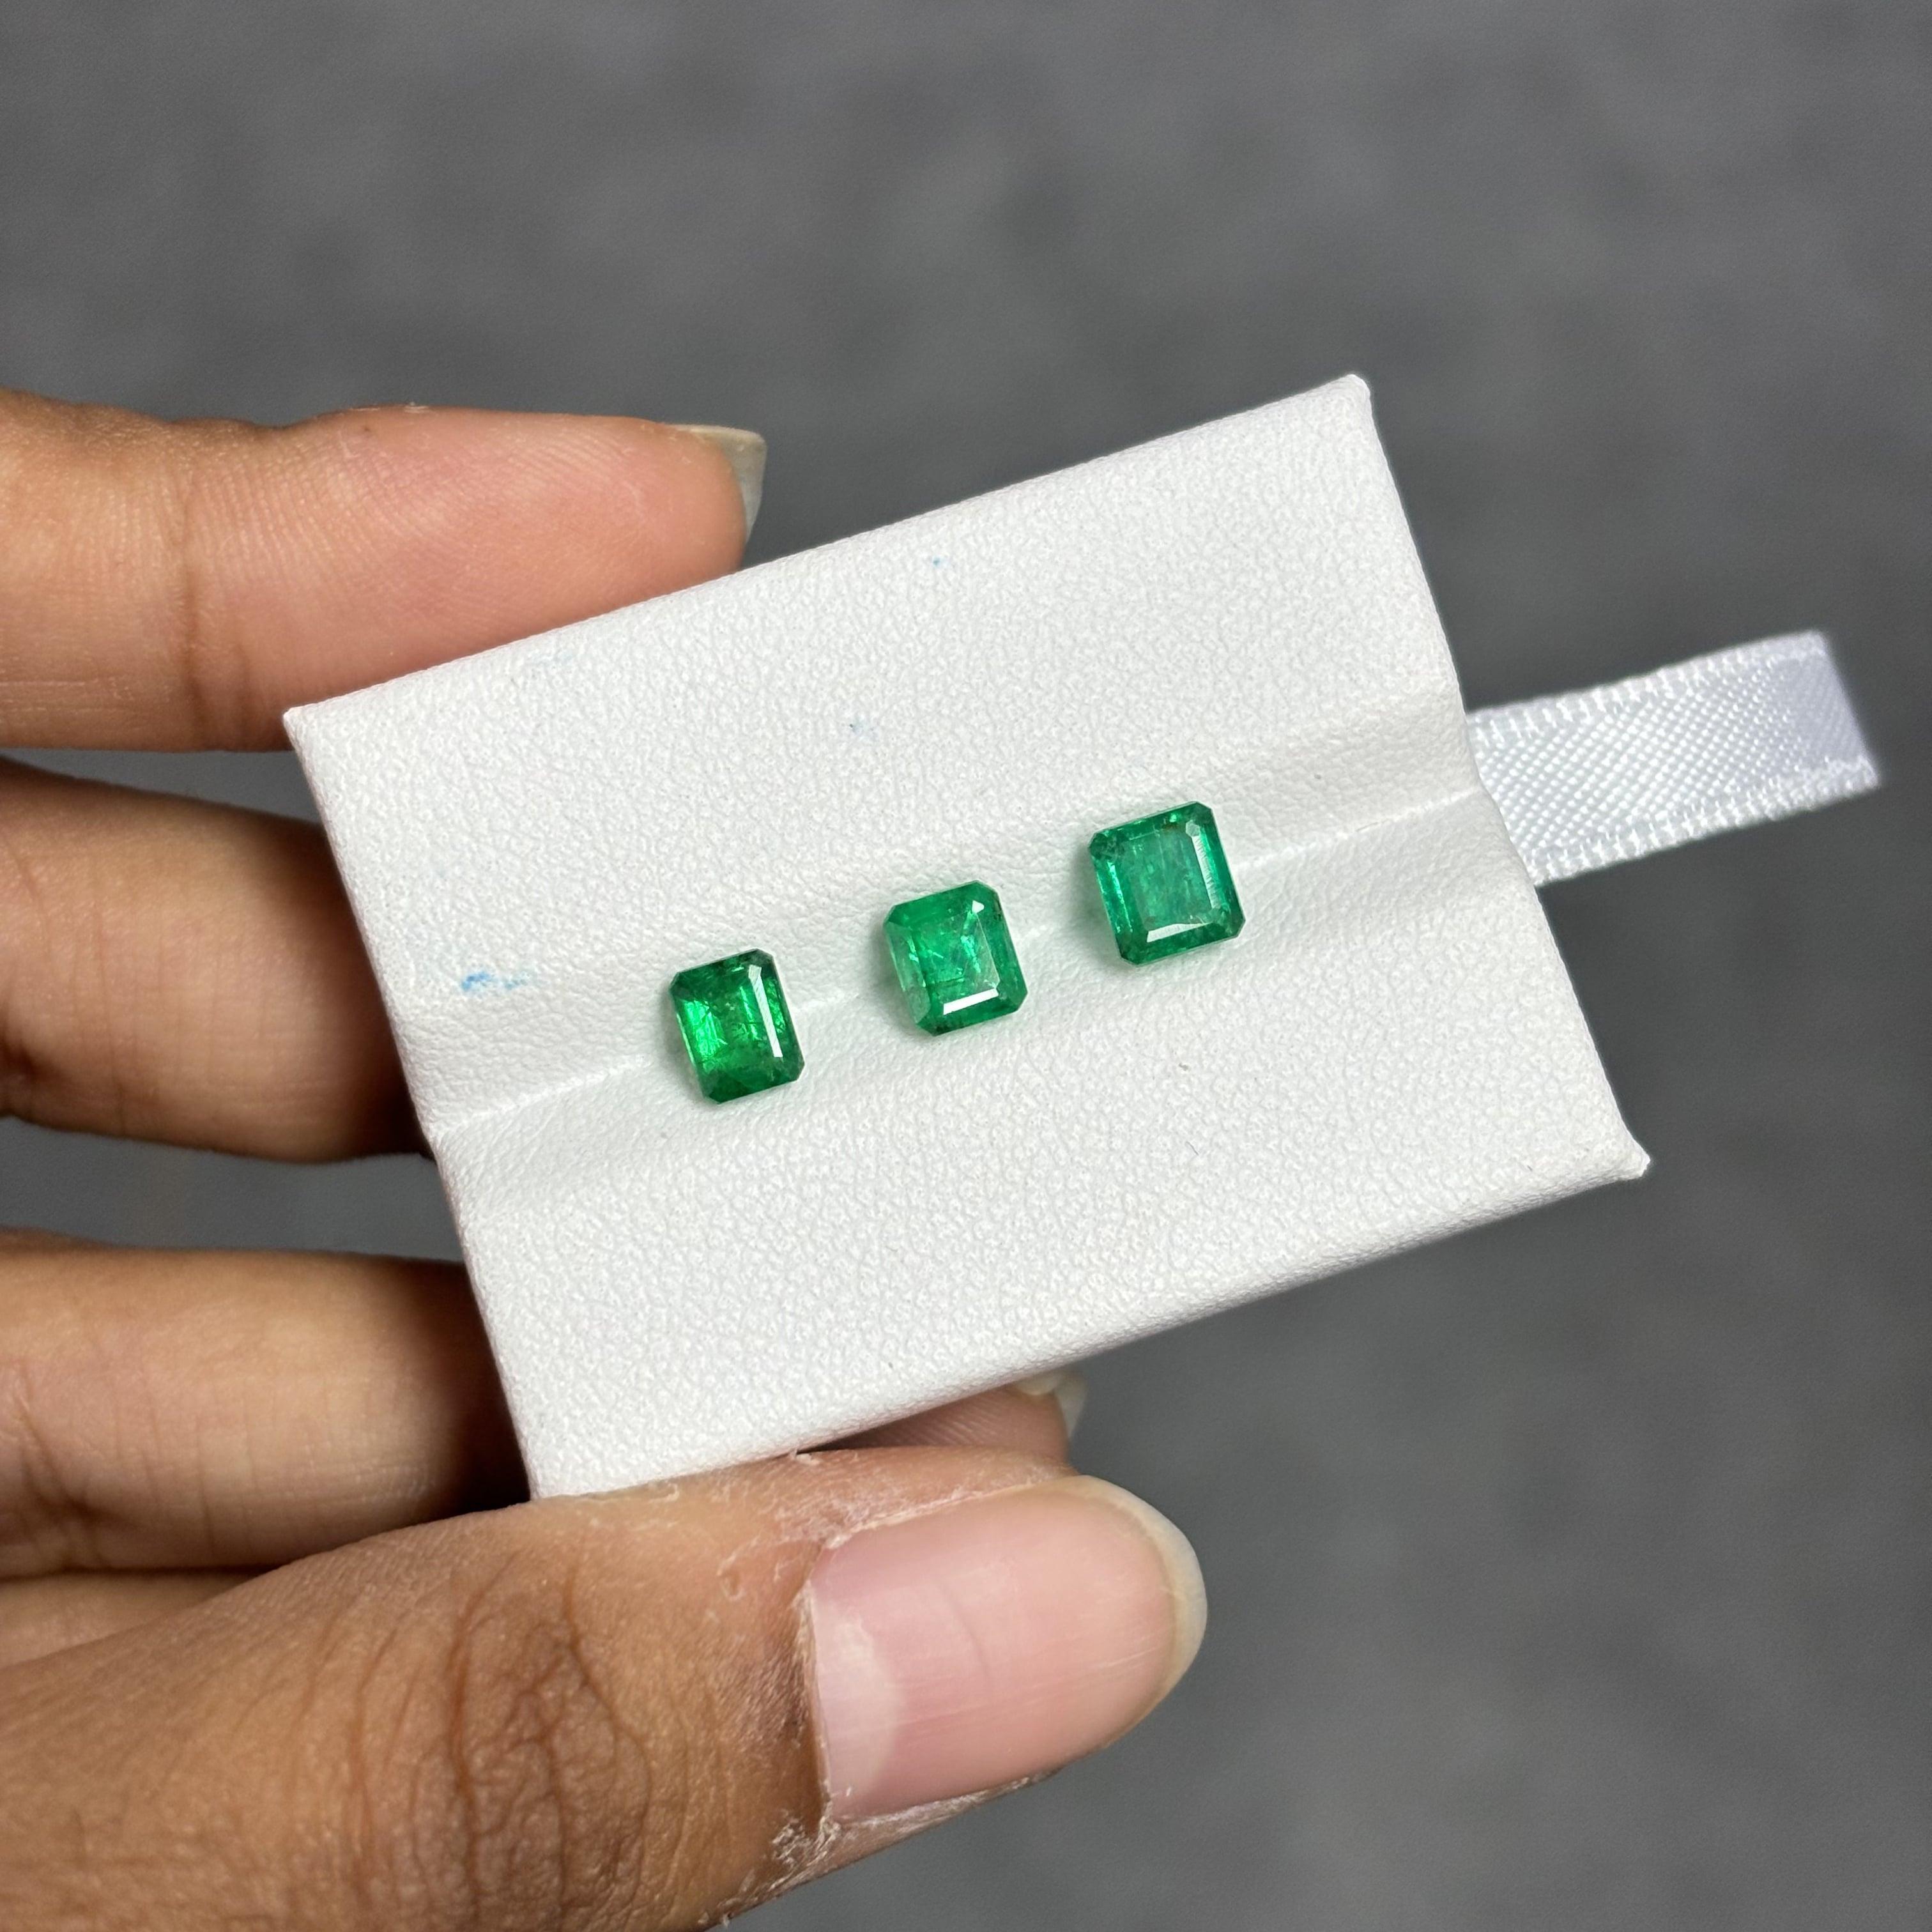 These stunning Emerald gemstones weigh a total of 2.12 Carat and are Panjshir Emeralds. They're vivid green in color and are cut into an emerald-cut shape. The individual weights of the Emeralds are 0.52, 0.75, and 0.85 Carat to be specific. They